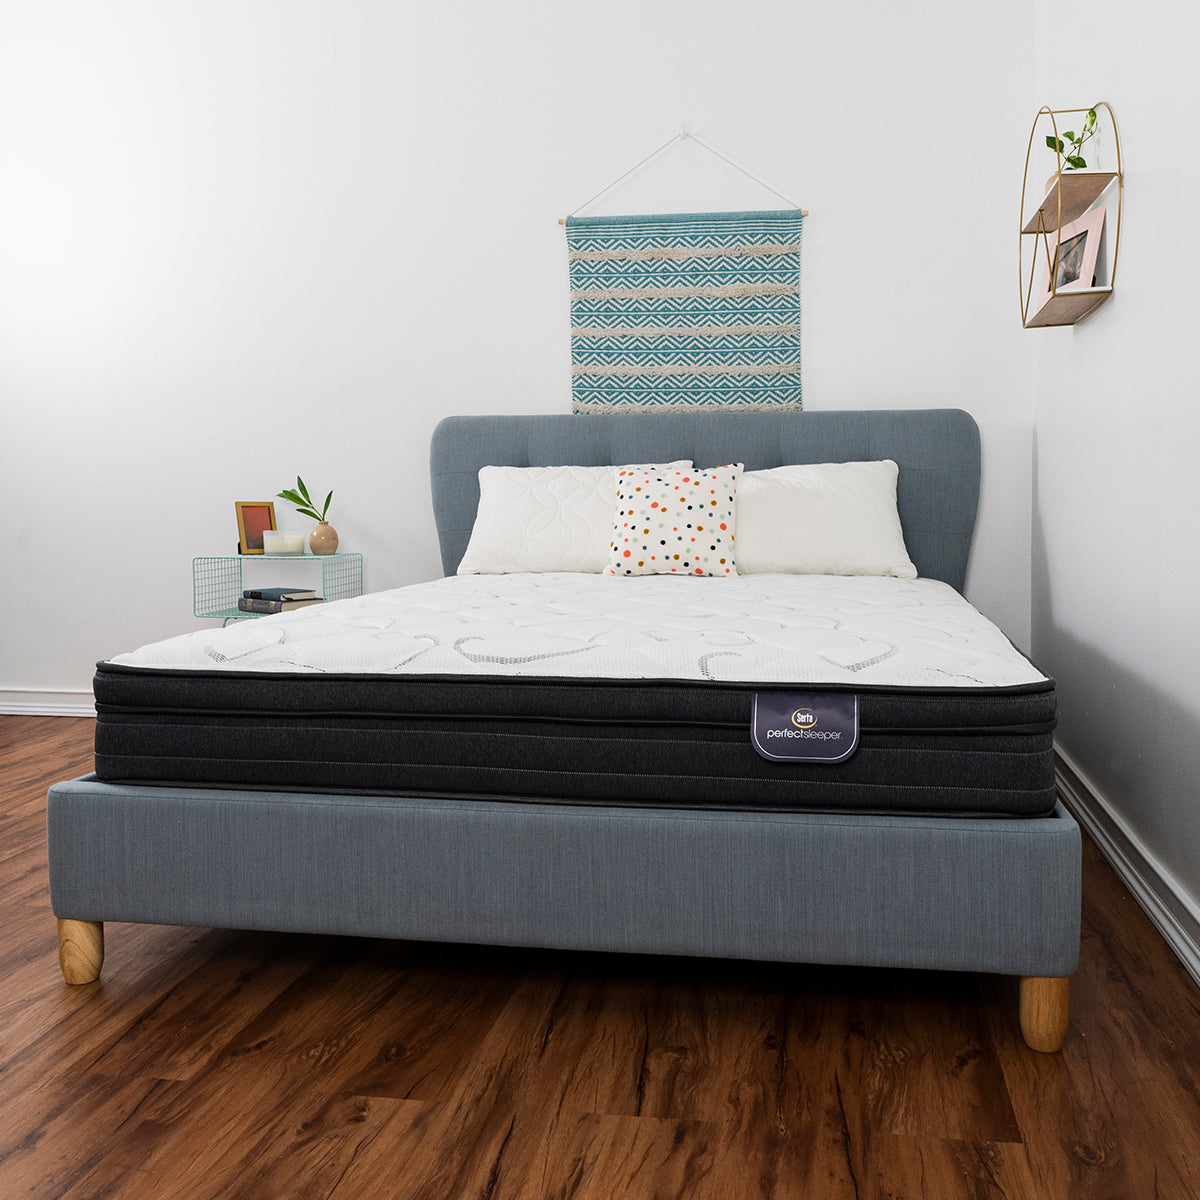 Serta Perfect Sleeper® Seabright Euro Top Mattress On Bed Frame With Pillows In Bedroom Front View